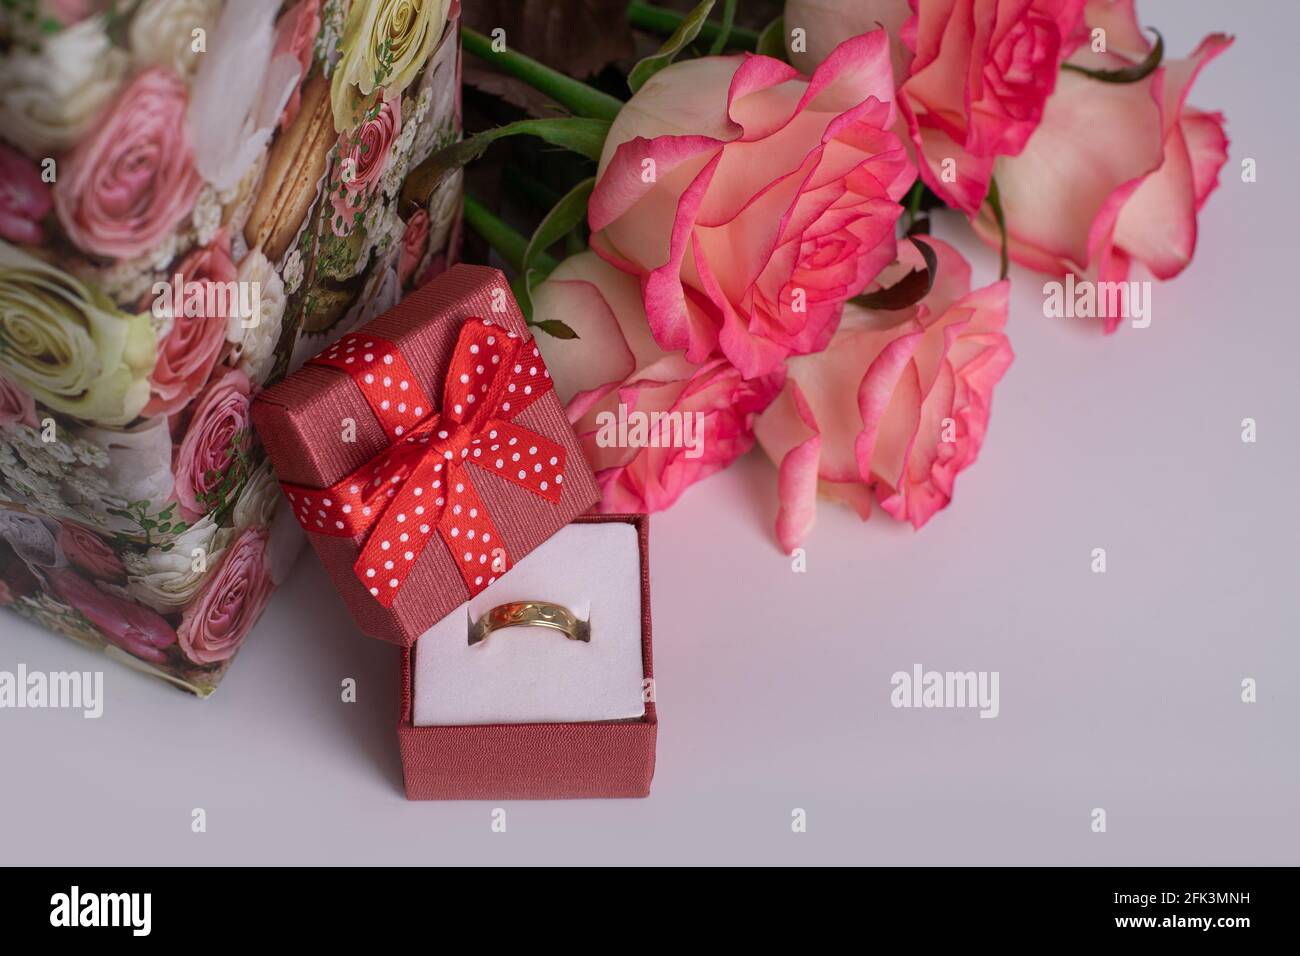 Gold wedding ring in a red box and a bouquet of pink roses. Romance. Marriage proposal Stock Photo